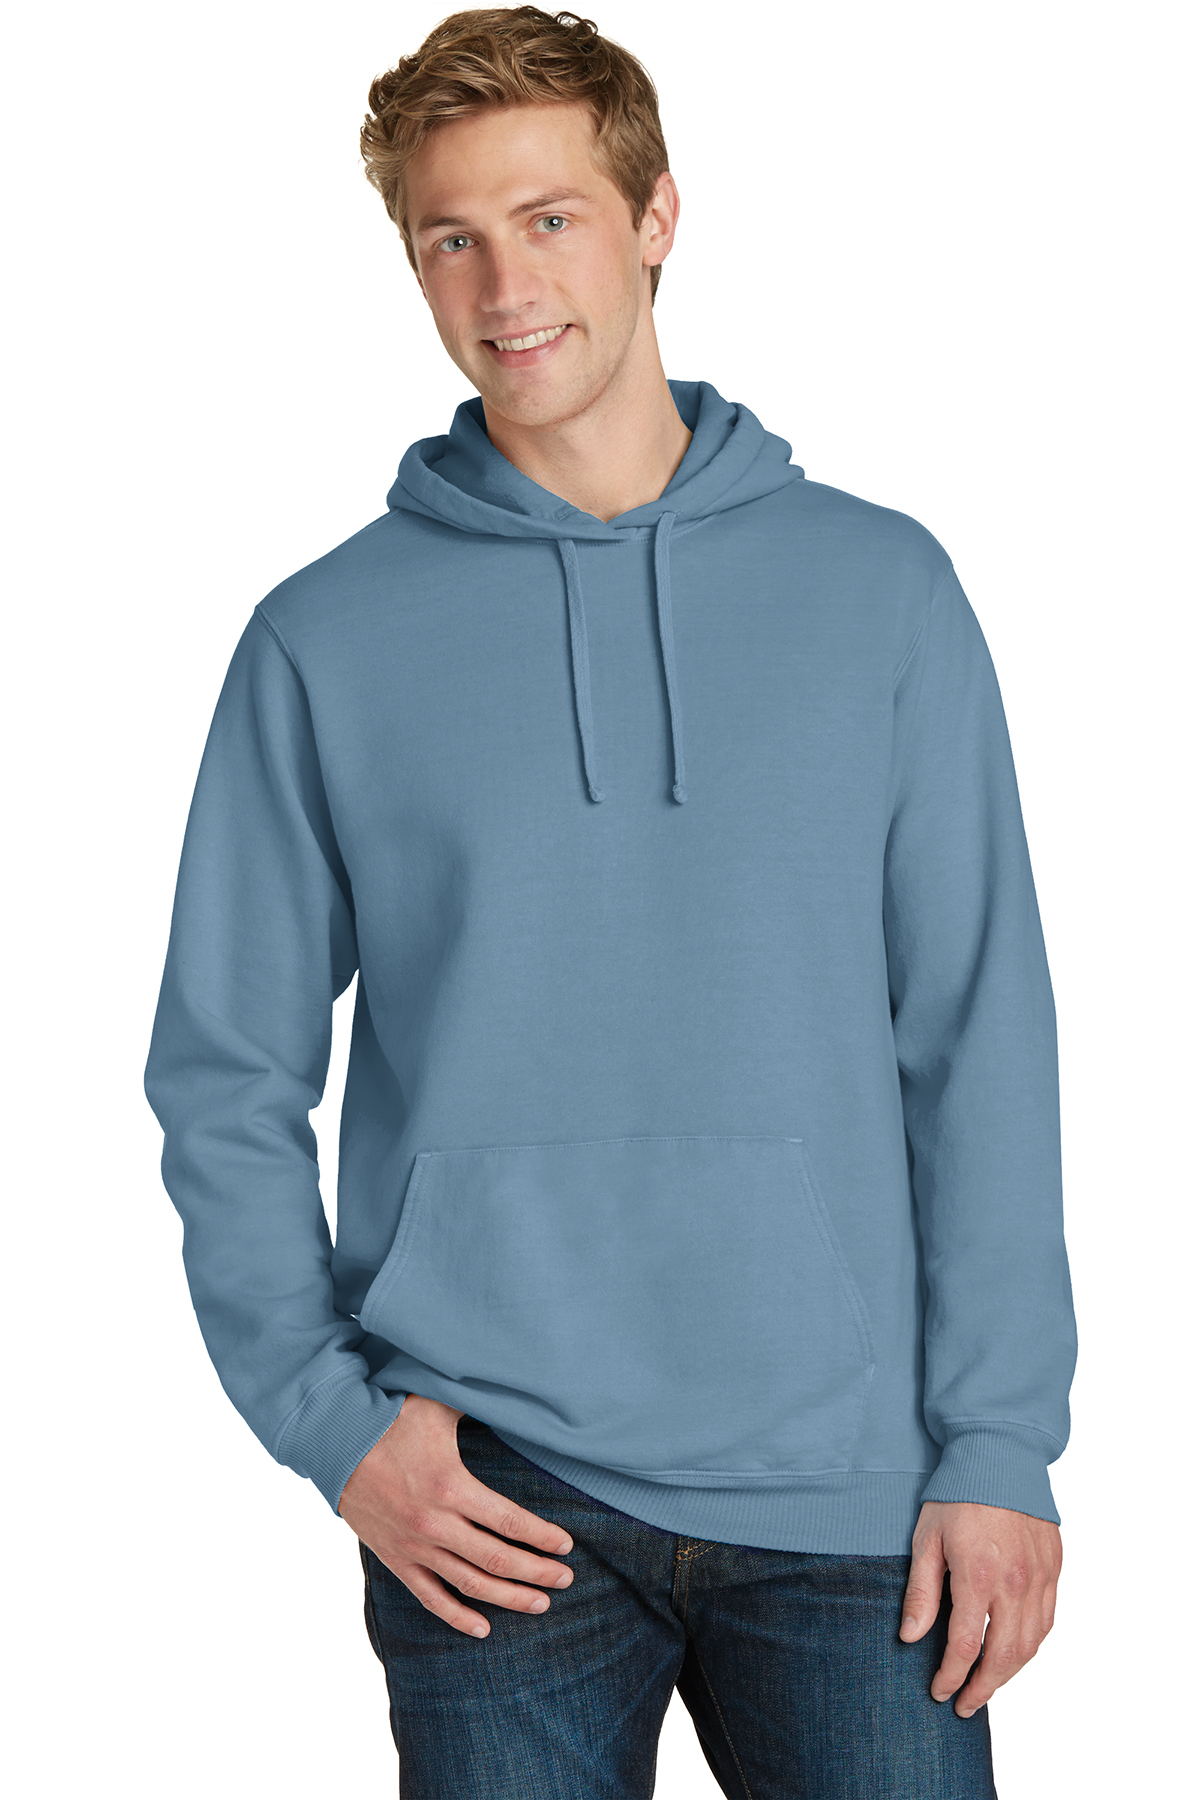 Port & Company Garment-Dyed Pullover Hooded Sweatshirt PC098H - Tiny ...